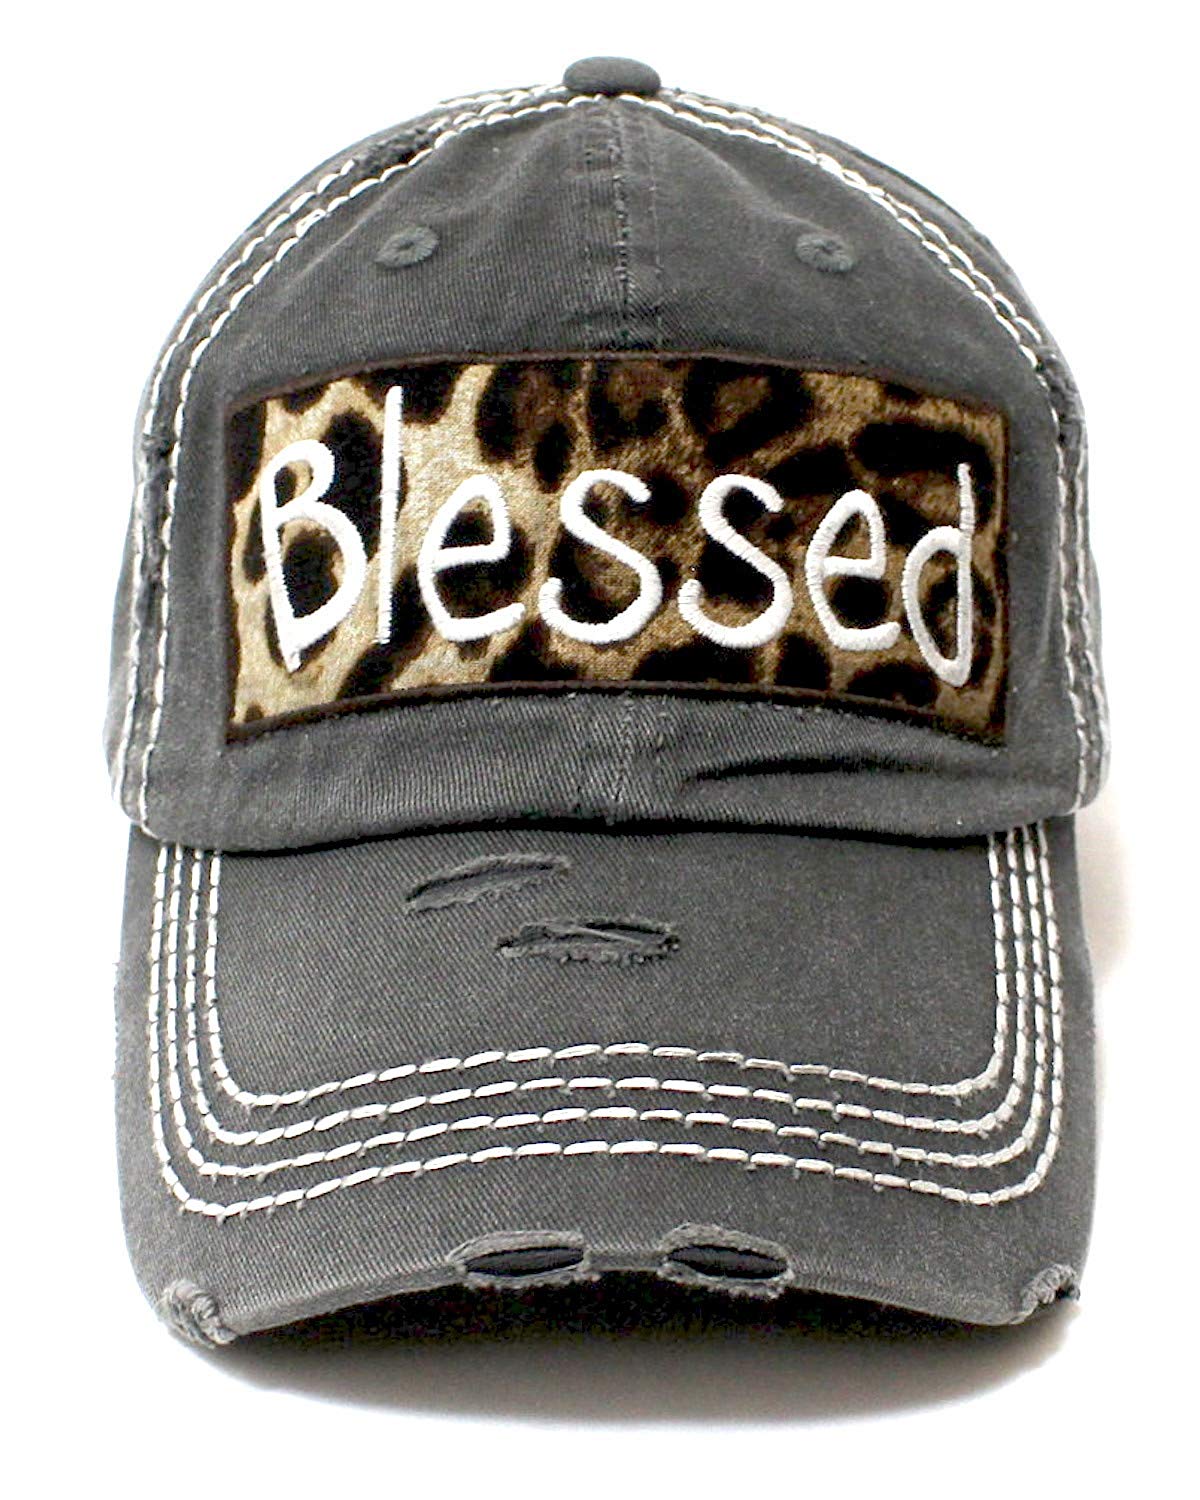 CAPS 'N VINTAGE Charcoal Blessed Leopard Patch Embroidery Hat - Caps 'N Vintage 